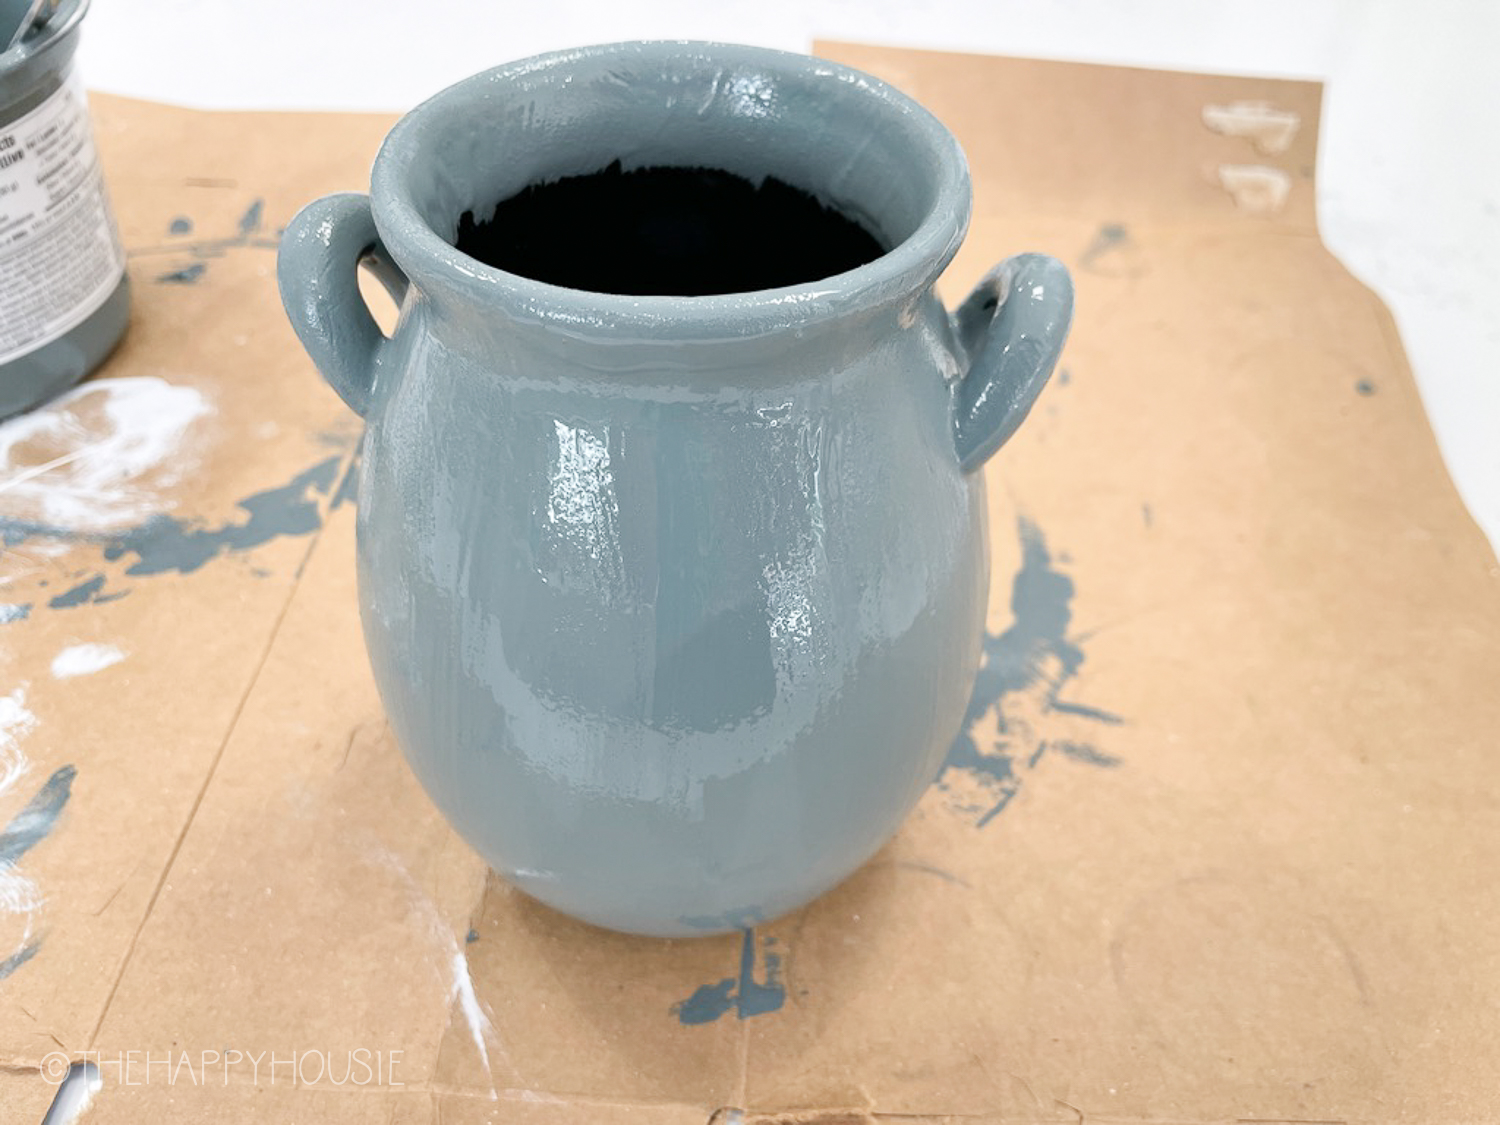 Painting one of the vases.